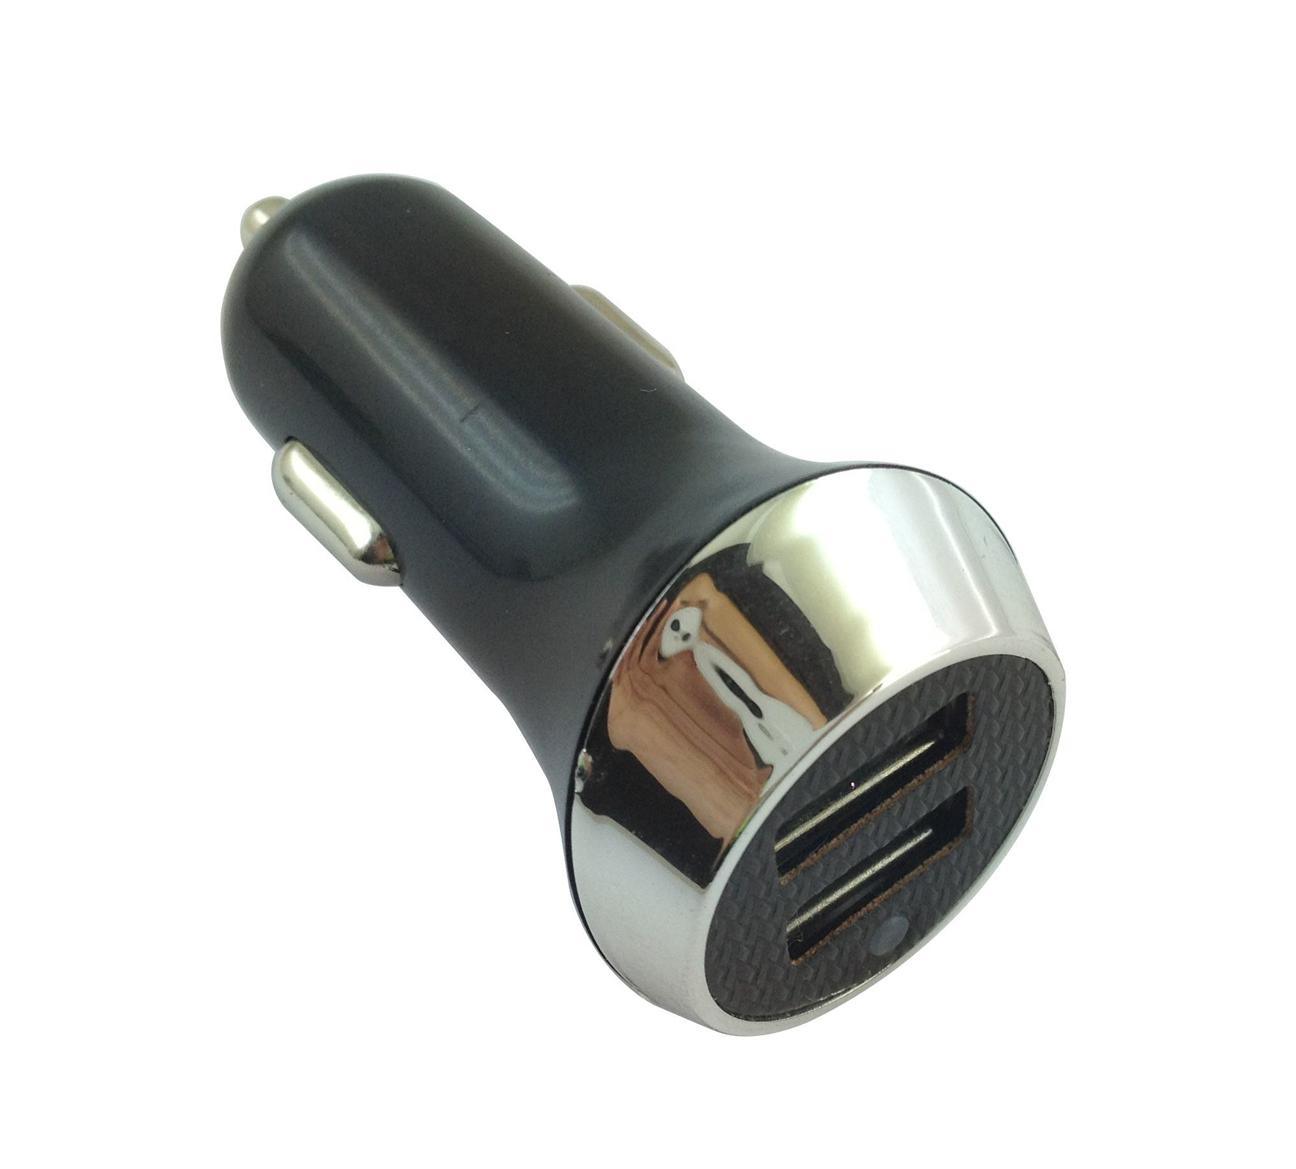 5V 2.4A Dual USB Car Charger for Mobile Phone